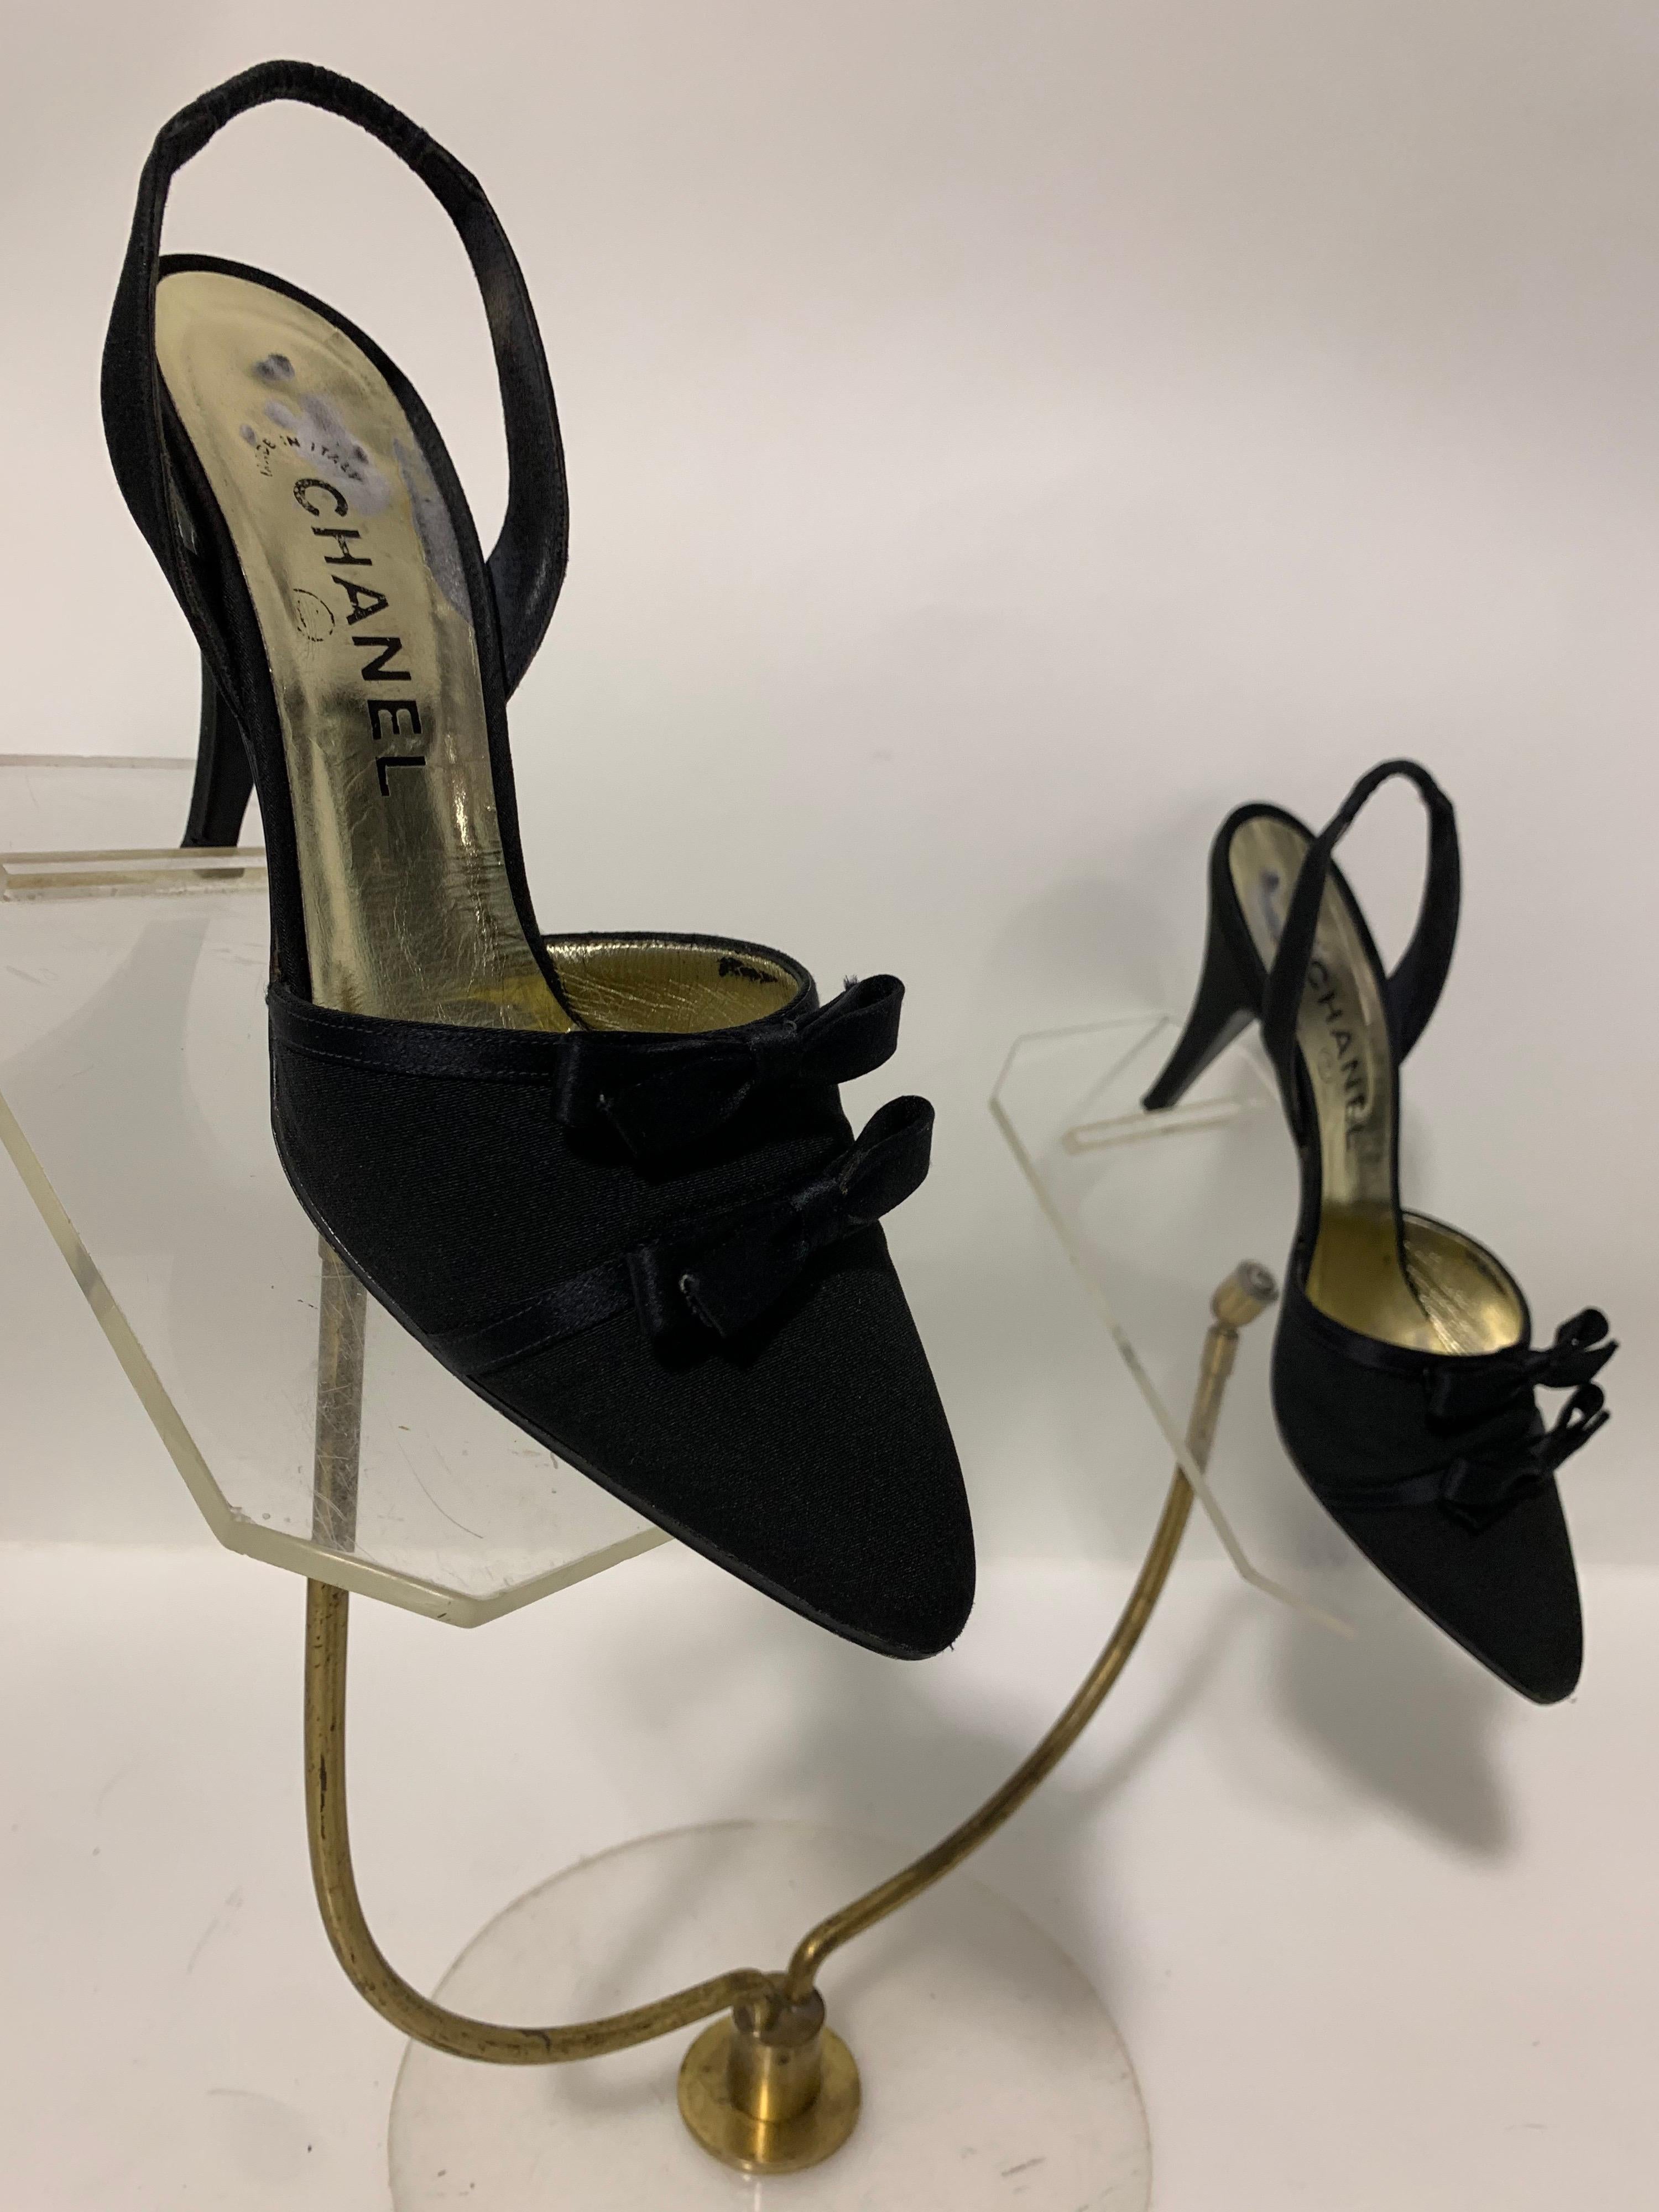 1980 Chanel Black Silk Fabric Slingback Shoe W/Satin Bows Size 7M For Sale 1